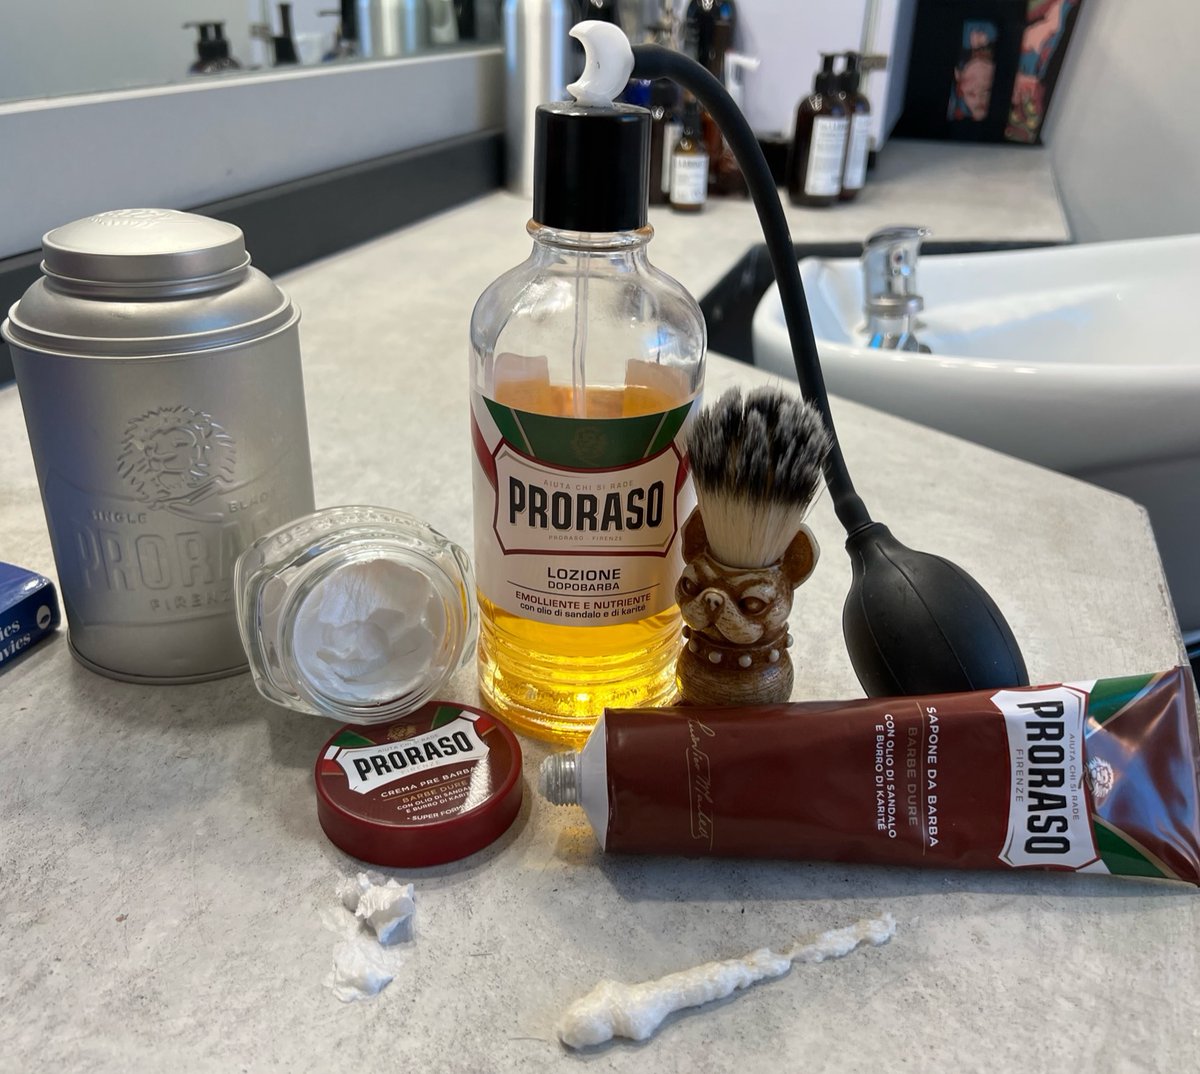 Product knowledge is just as important as the fundamentals #bladecraftbarberacademy 

#barberschool #barber #barbershop #barberlife #barberworld #barbershopconnect #barbers #barbergang #barberlove #barbernation #barbering #barberstyle #barberart #wahl #thebarberpost